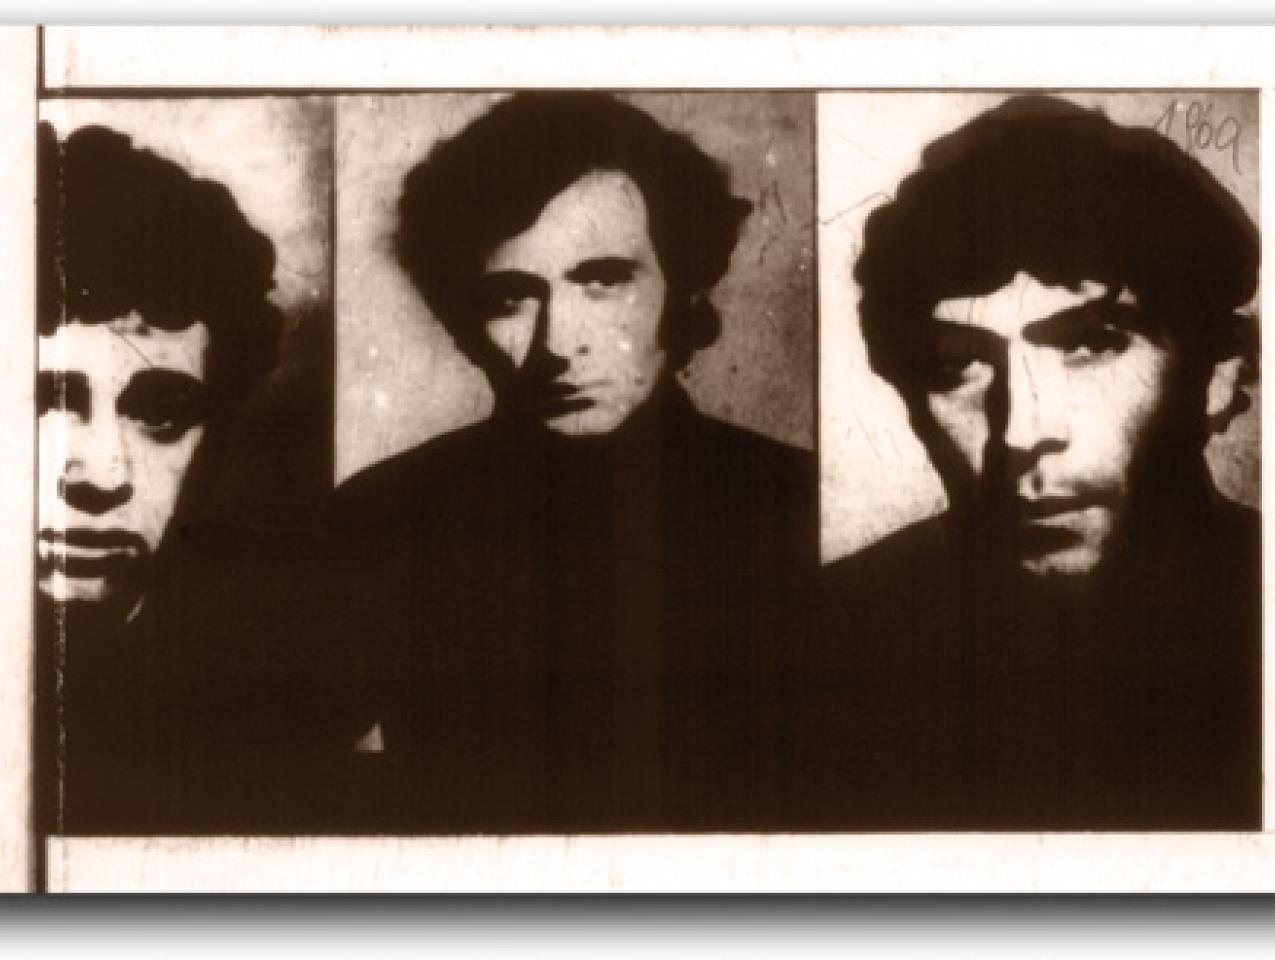 Microfilmed images from a KGB dossier show, left to right, Akop Stepanian, Stepan Zatikian, and Zaven Bagdasarian.